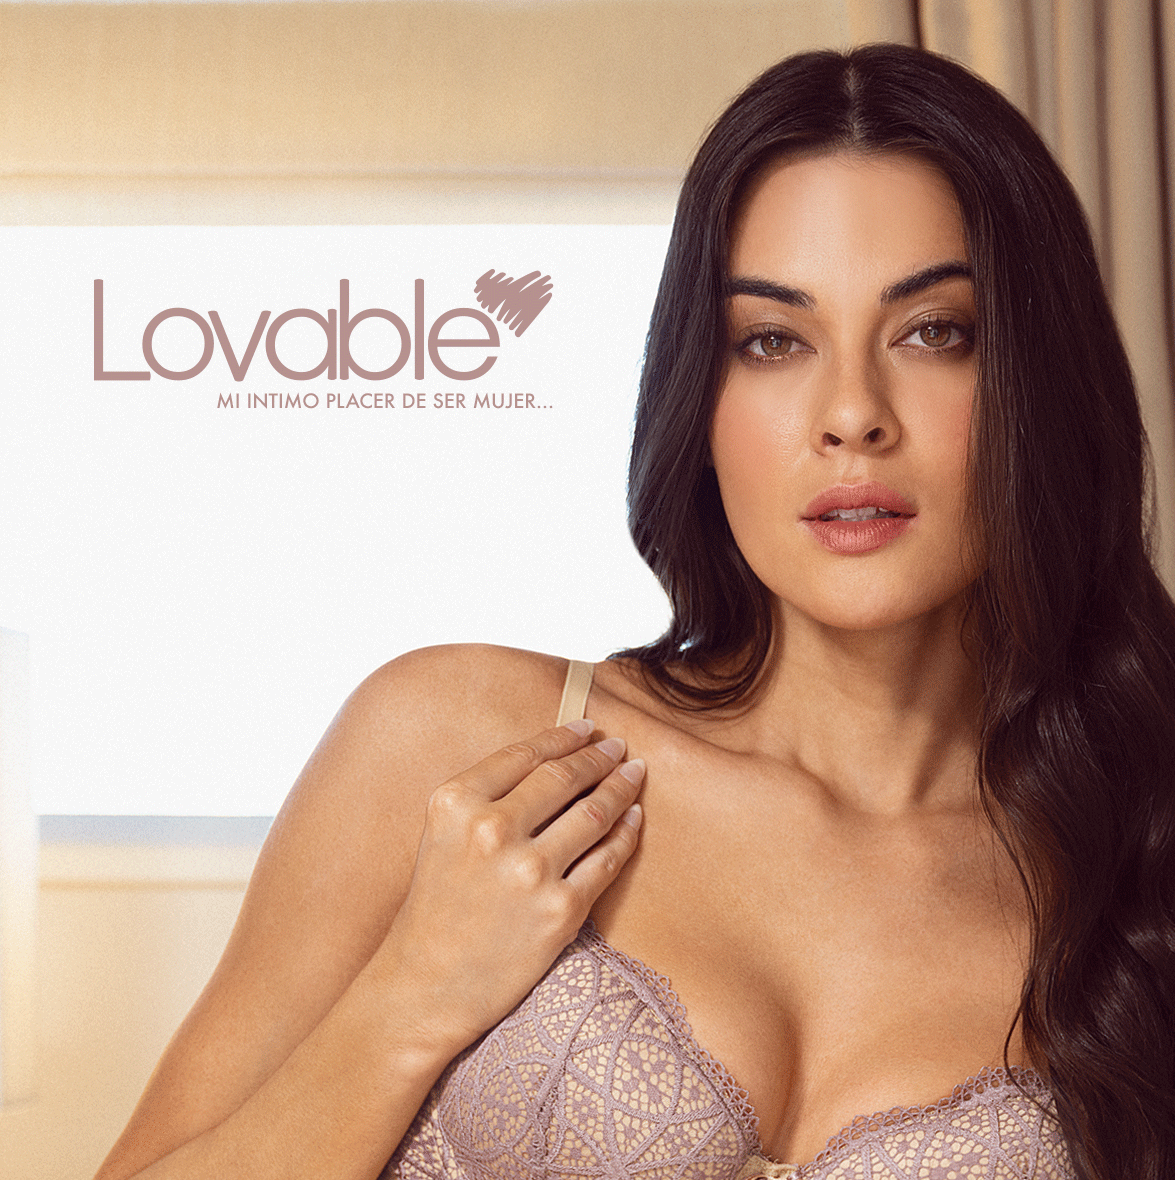 trampa Doncella caos Lovable (@Lovablefans) / Twitter